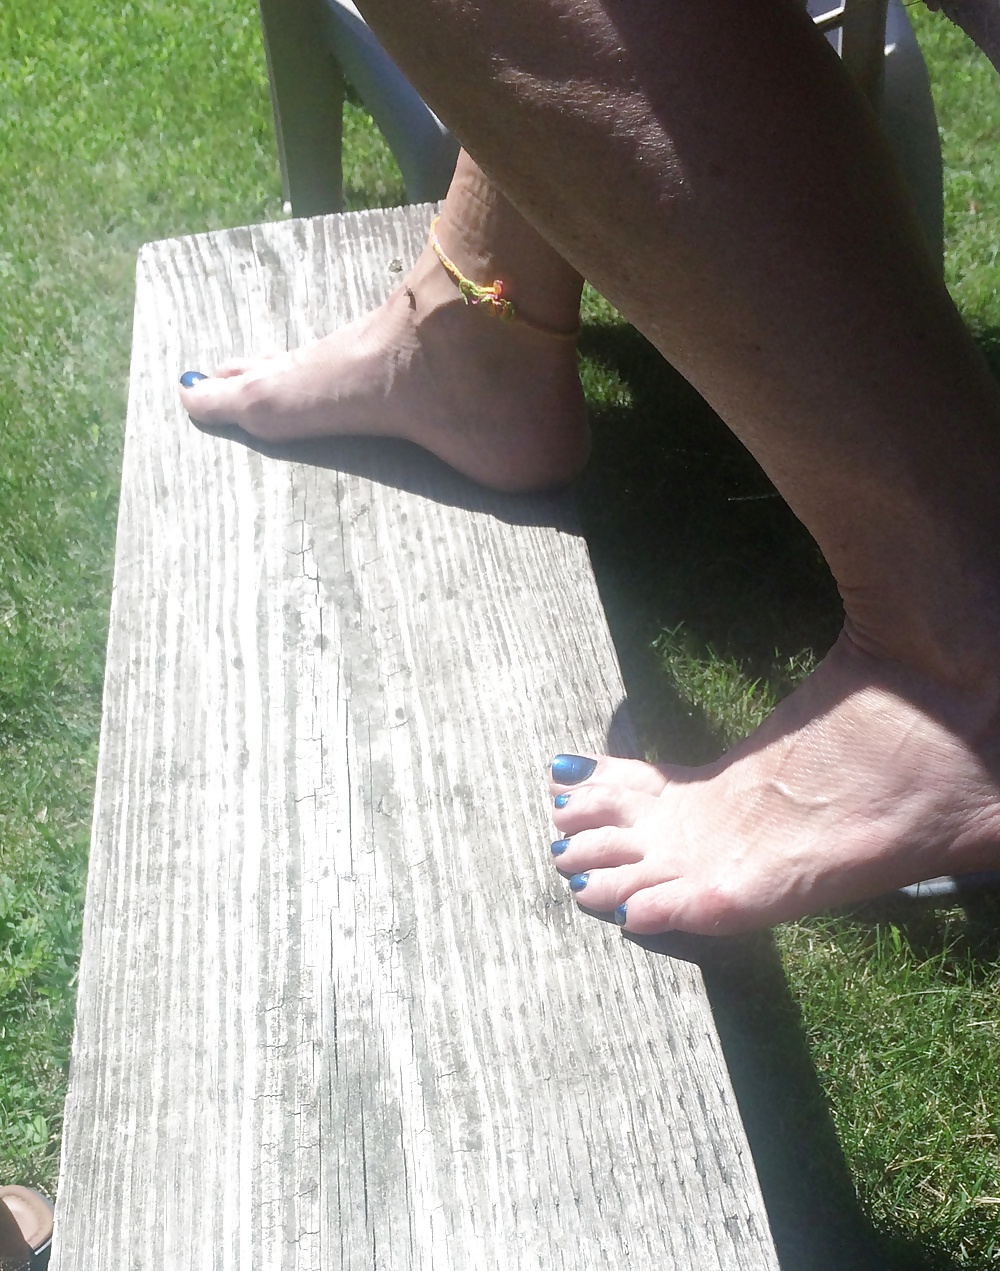 Porn image candid feet at cabin